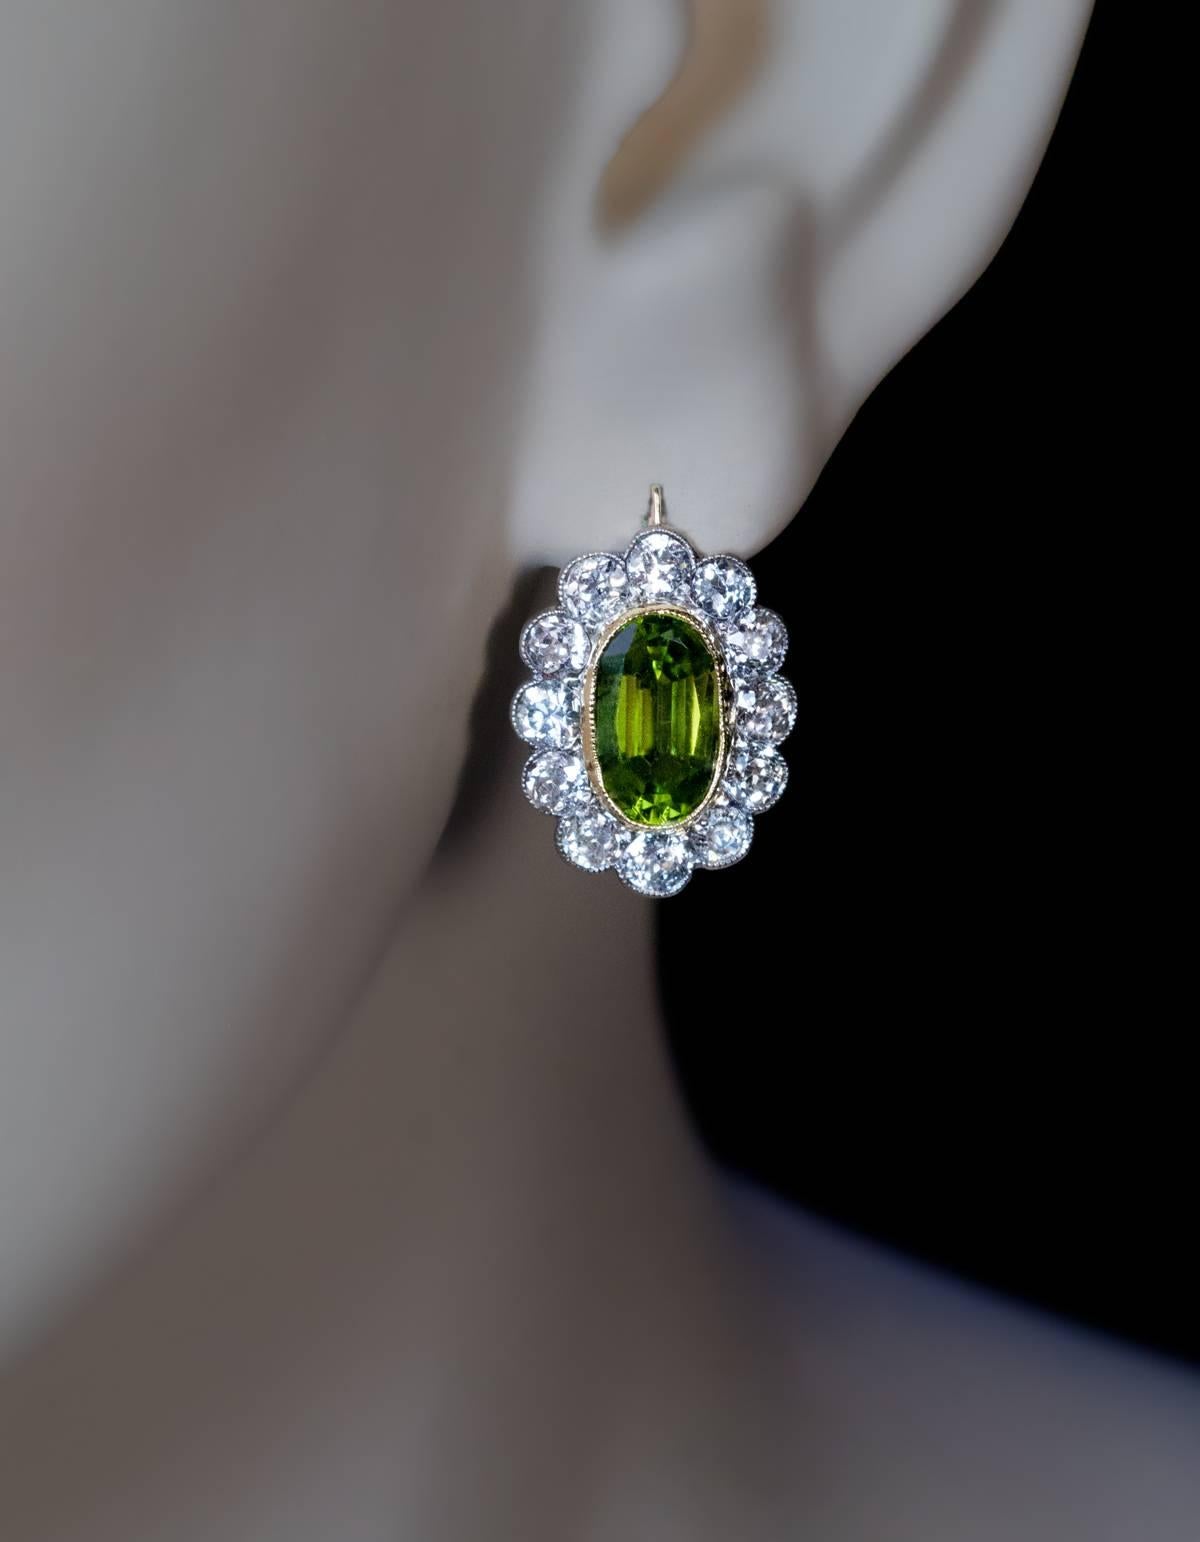 Made in Moscow between 1908 and 1917

14K gold handcrafted antique earrings are centered with oval faceted golden-green sparkling peridots set in gold milgrain bezels surrounded by sparkling old European cut diamonds set in silver over